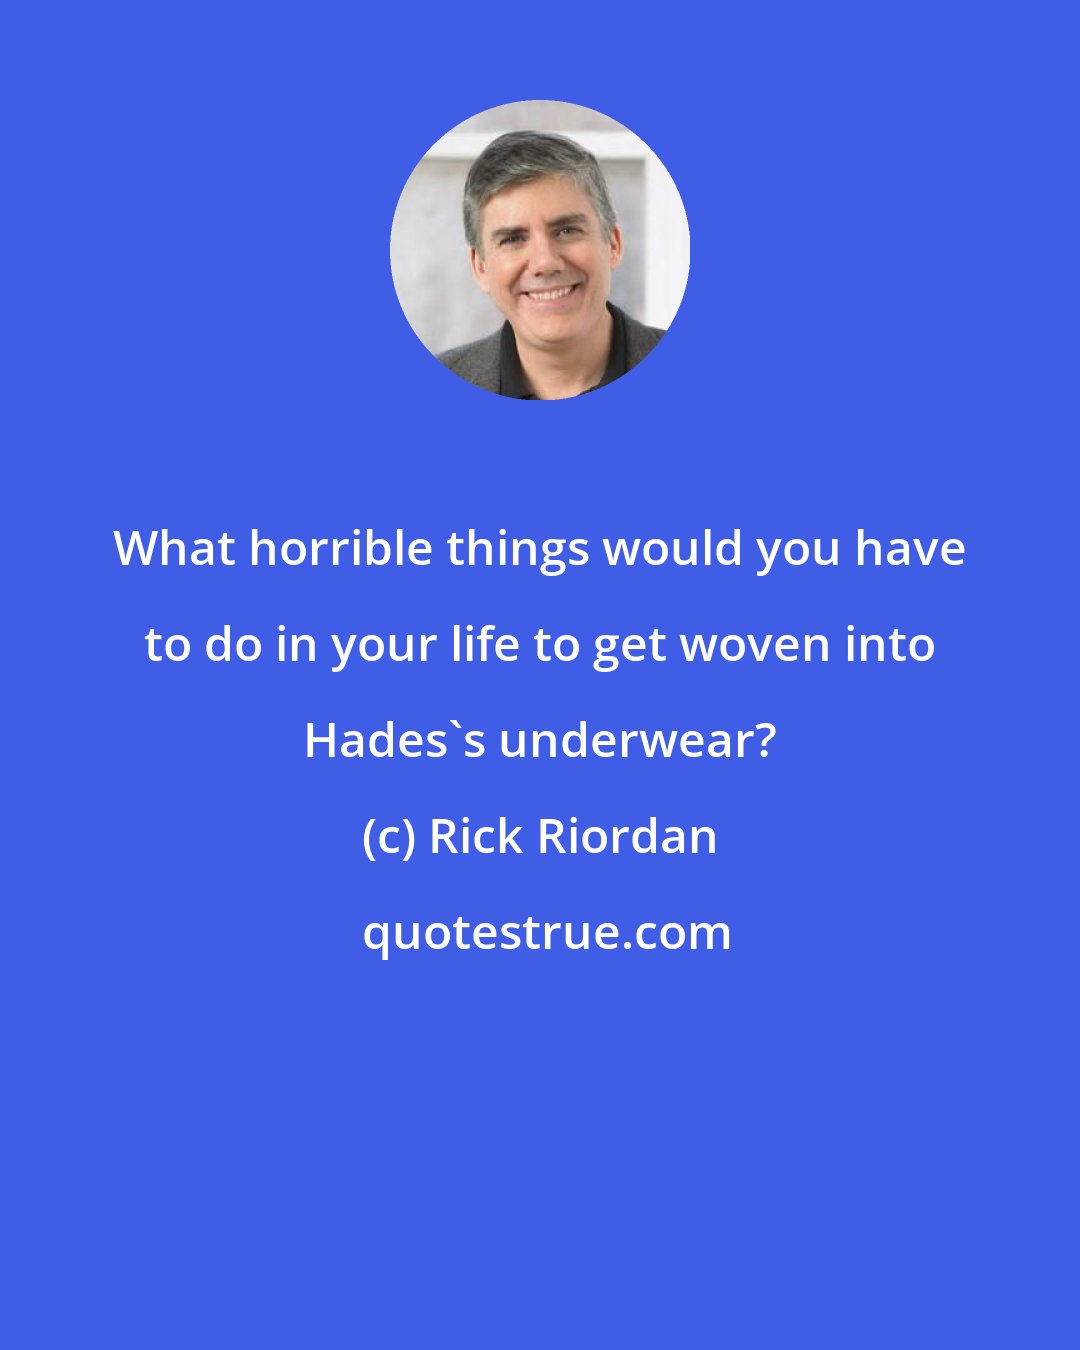 Rick Riordan: What horrible things would you have to do in your life to get woven into Hades's underwear?